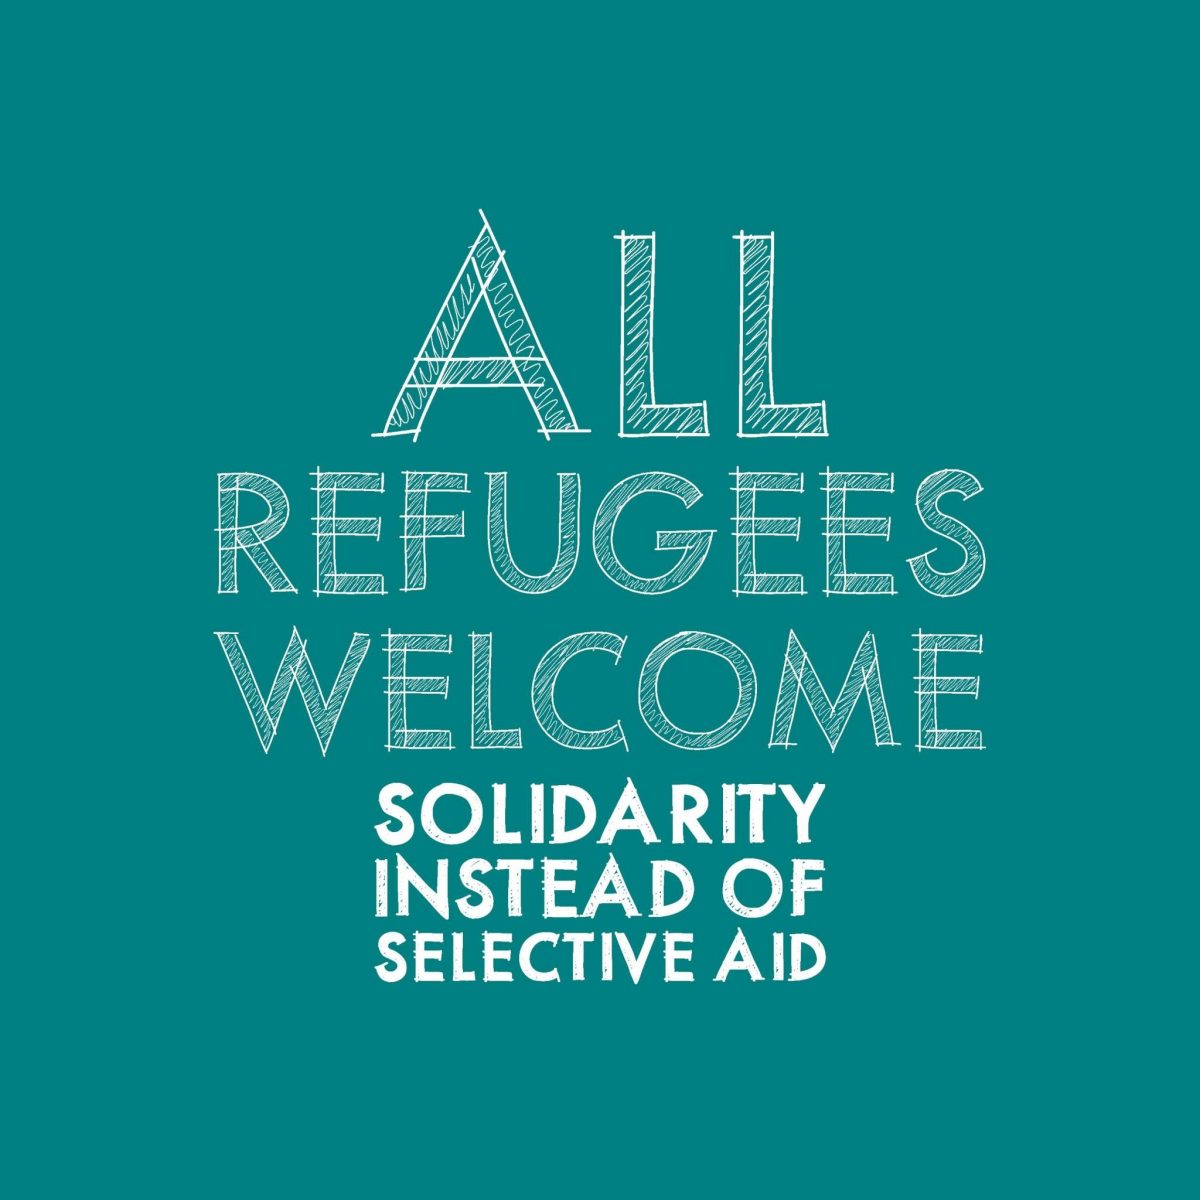 All Refugees Welcome! Solidarity instead of selective aid